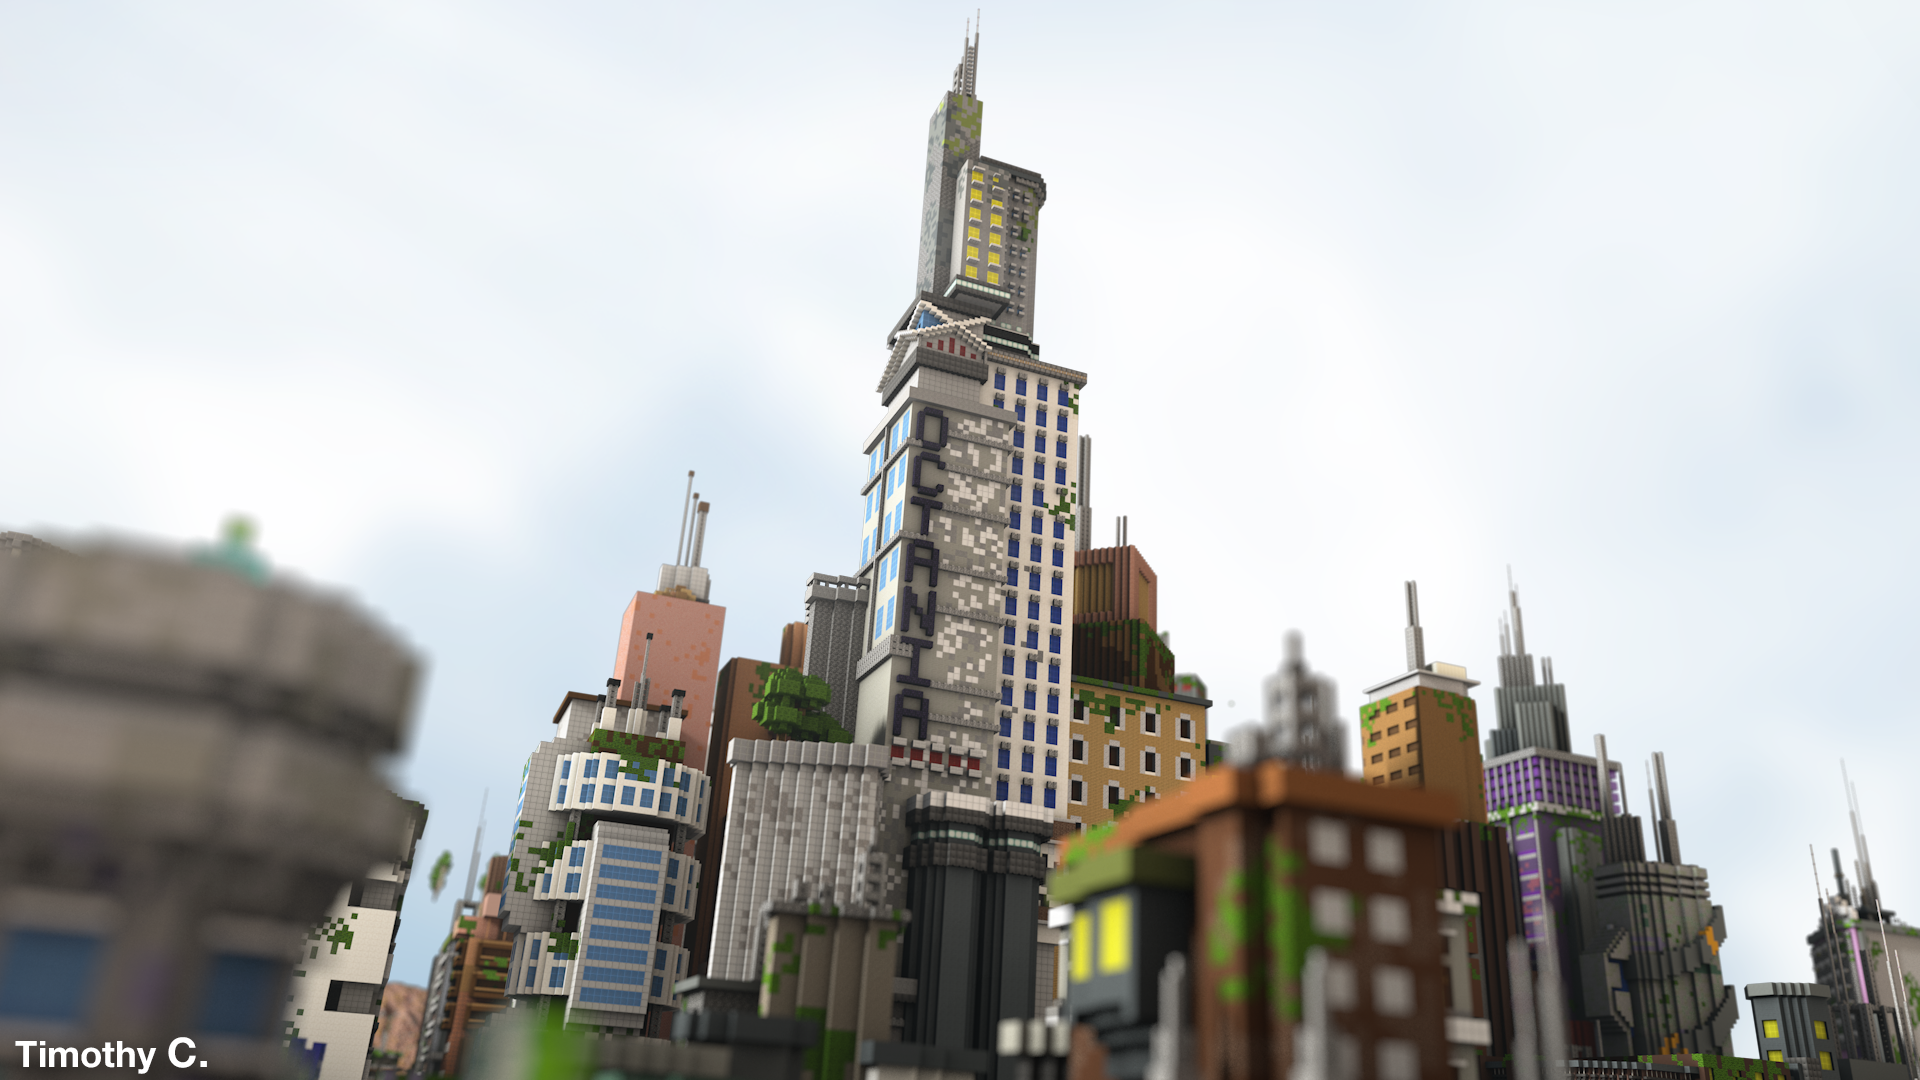 Look At This Fantastic Minecraft City